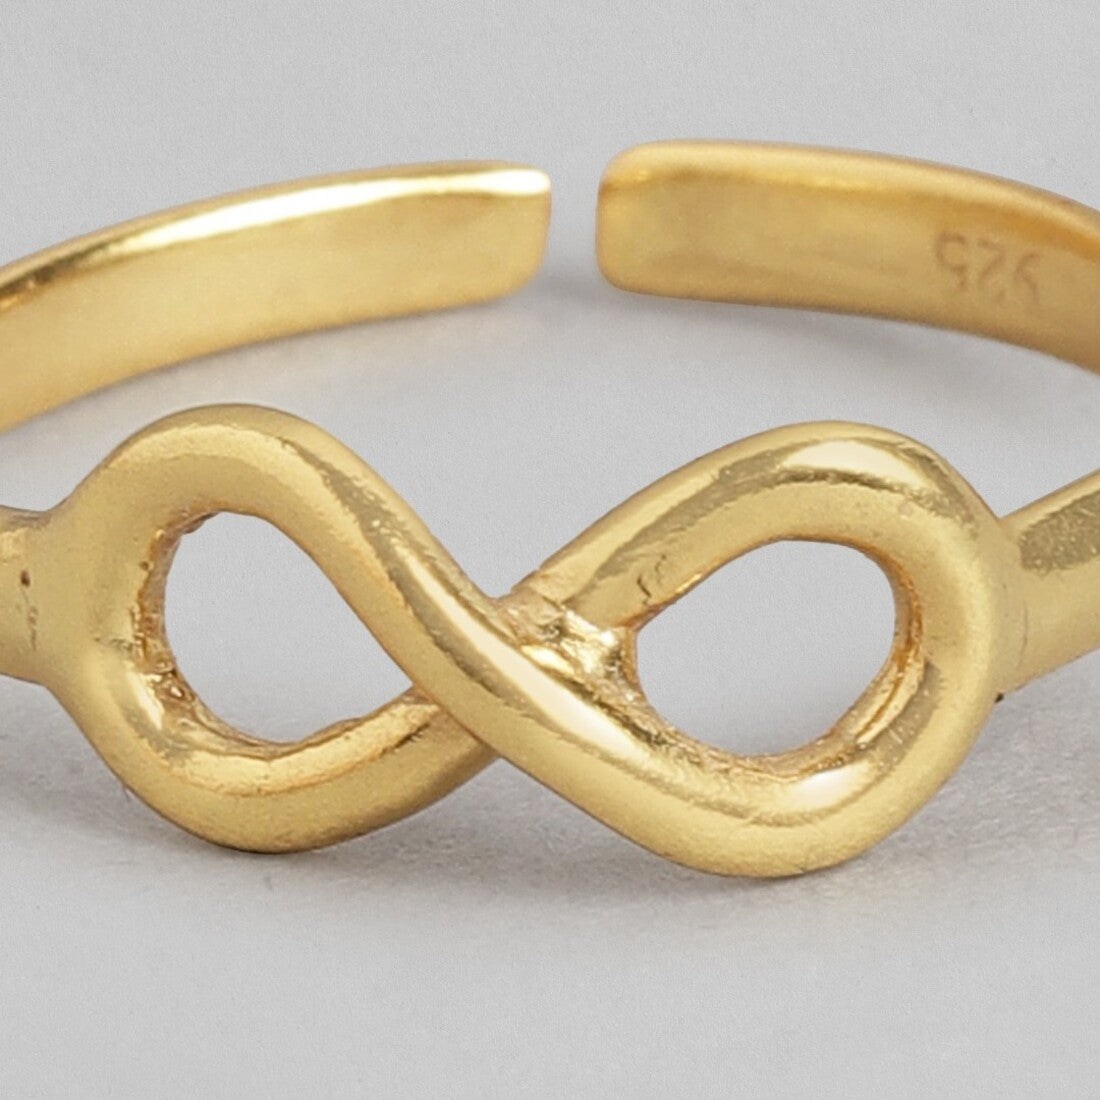 Eternal Love Gold-Plated 925 Sterling Silver Infinity Ring